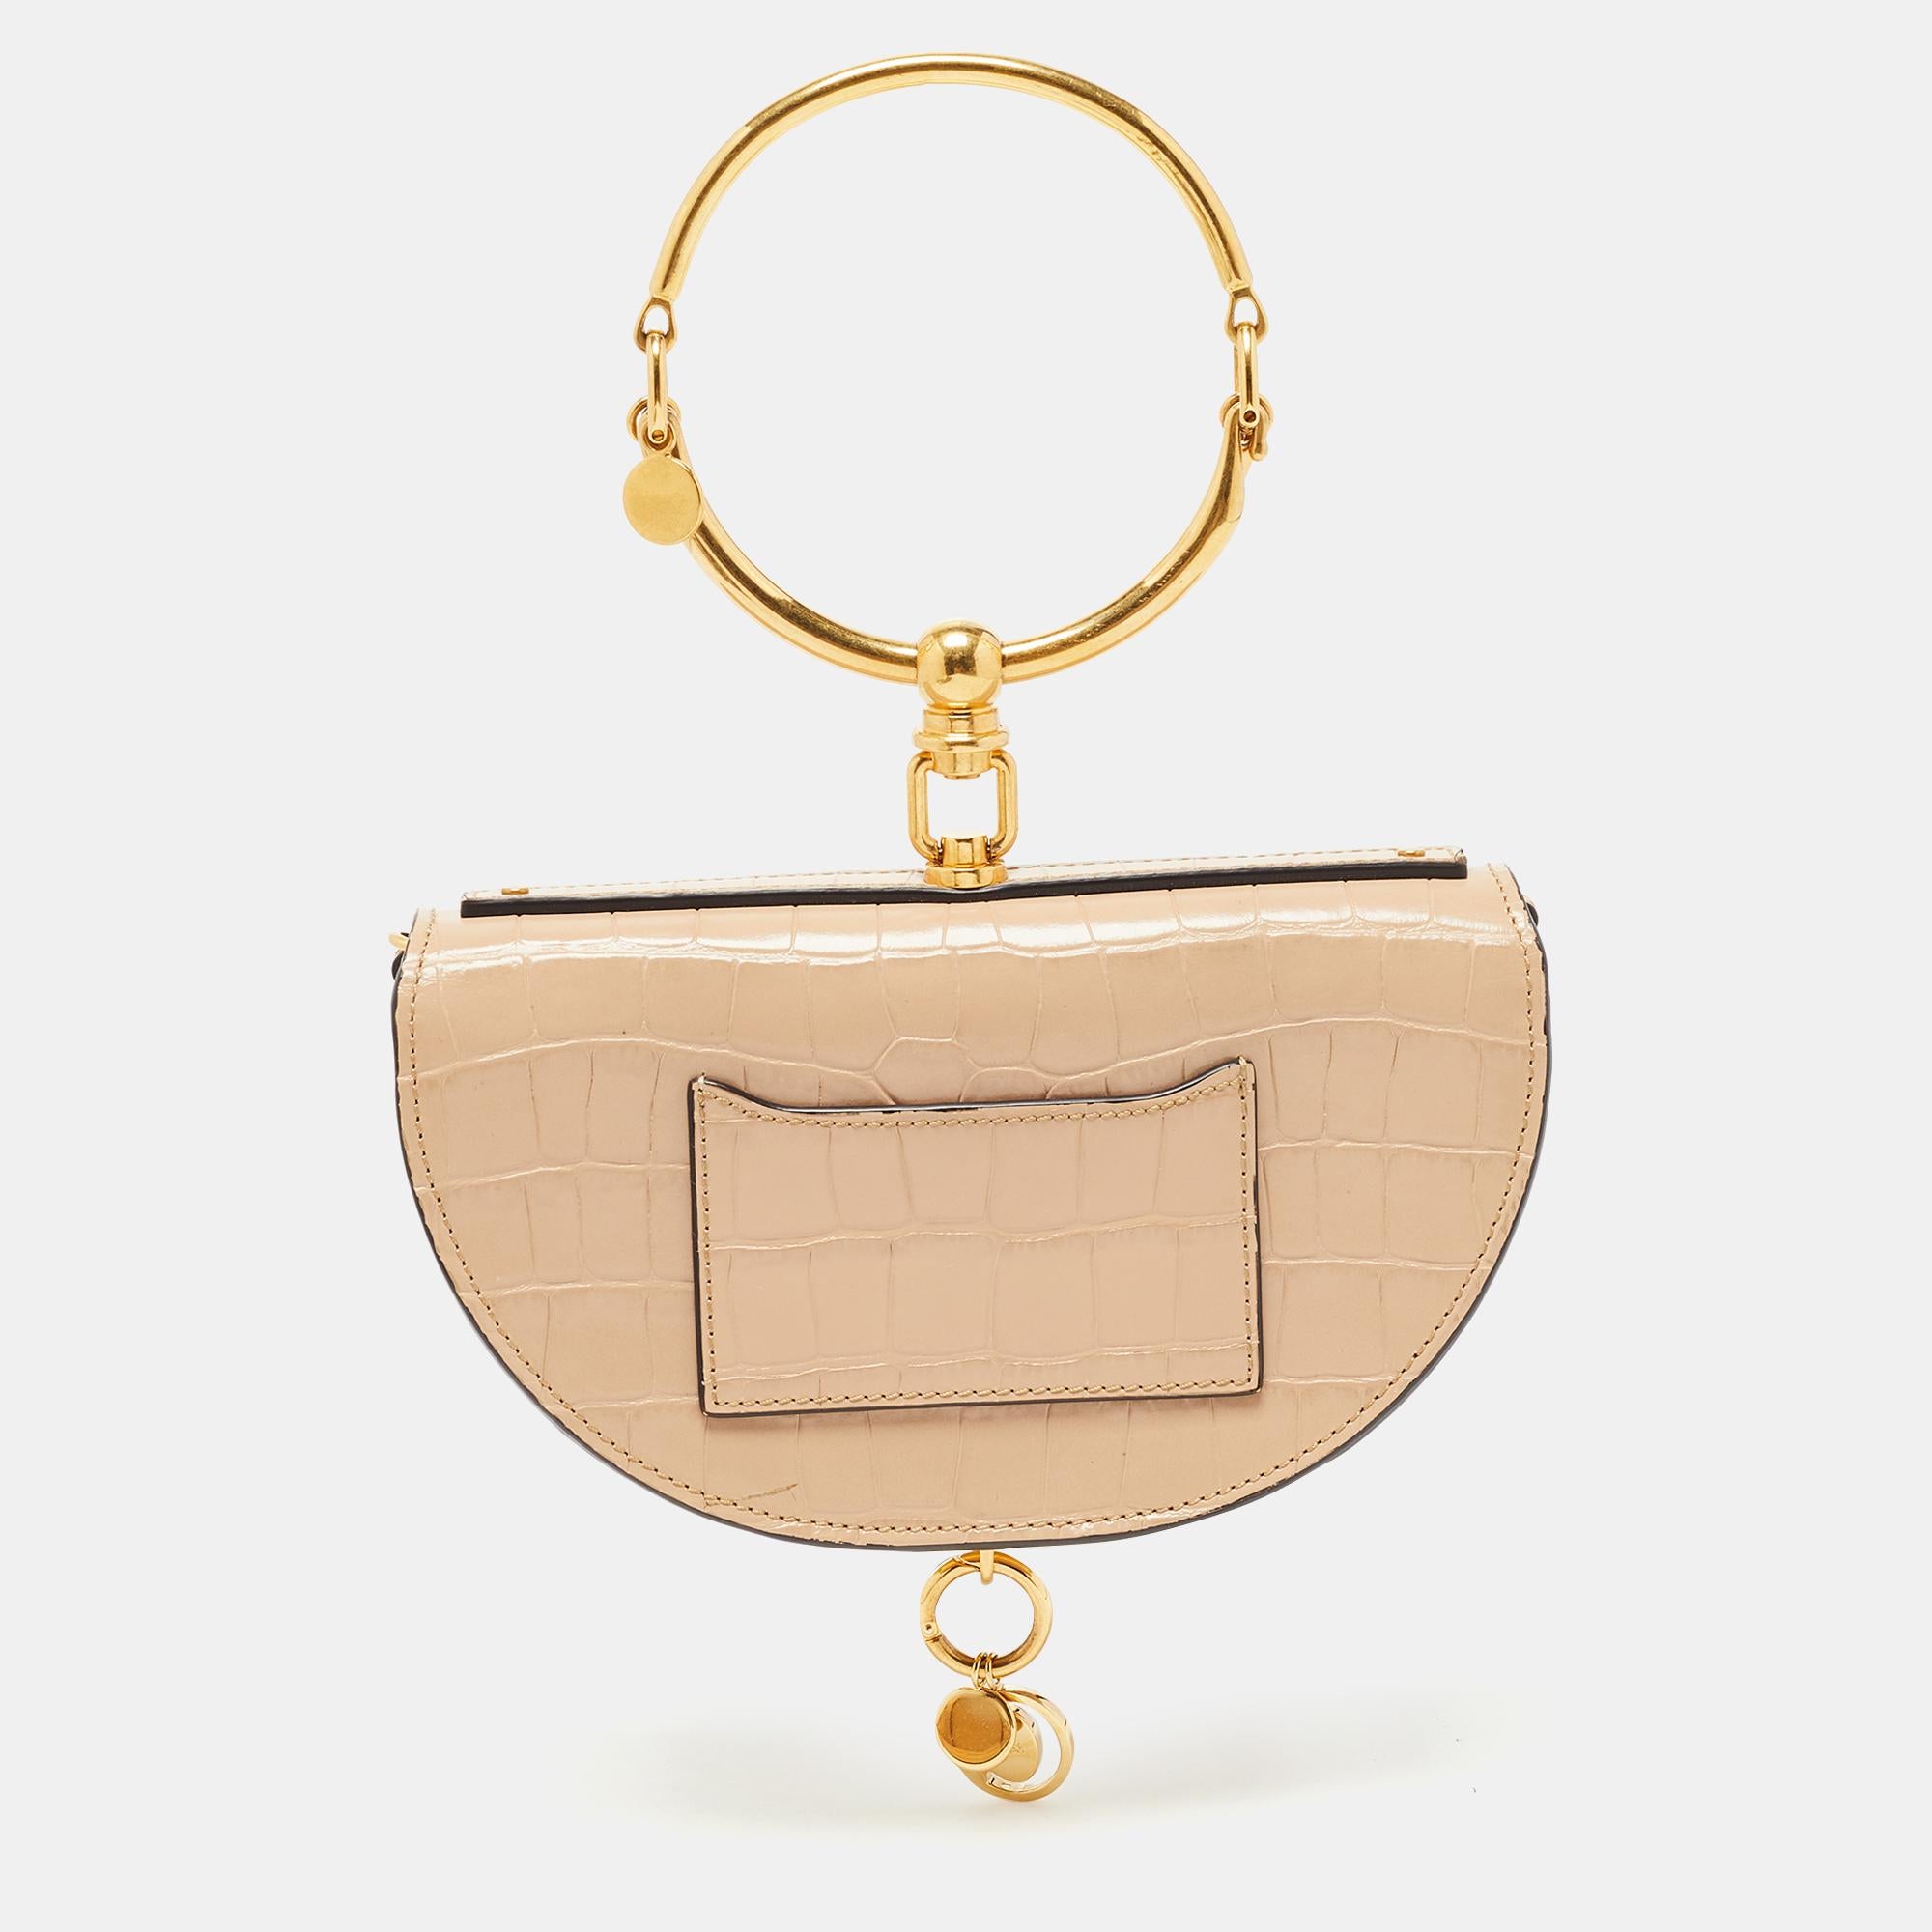 This Nile bag by Chloe can become your most favorite bag, thanks to its unique shape and the bracelet handle. It has been crafted from leather and styled with a front flap that opens to a leather interior housing an open compartment and a slip